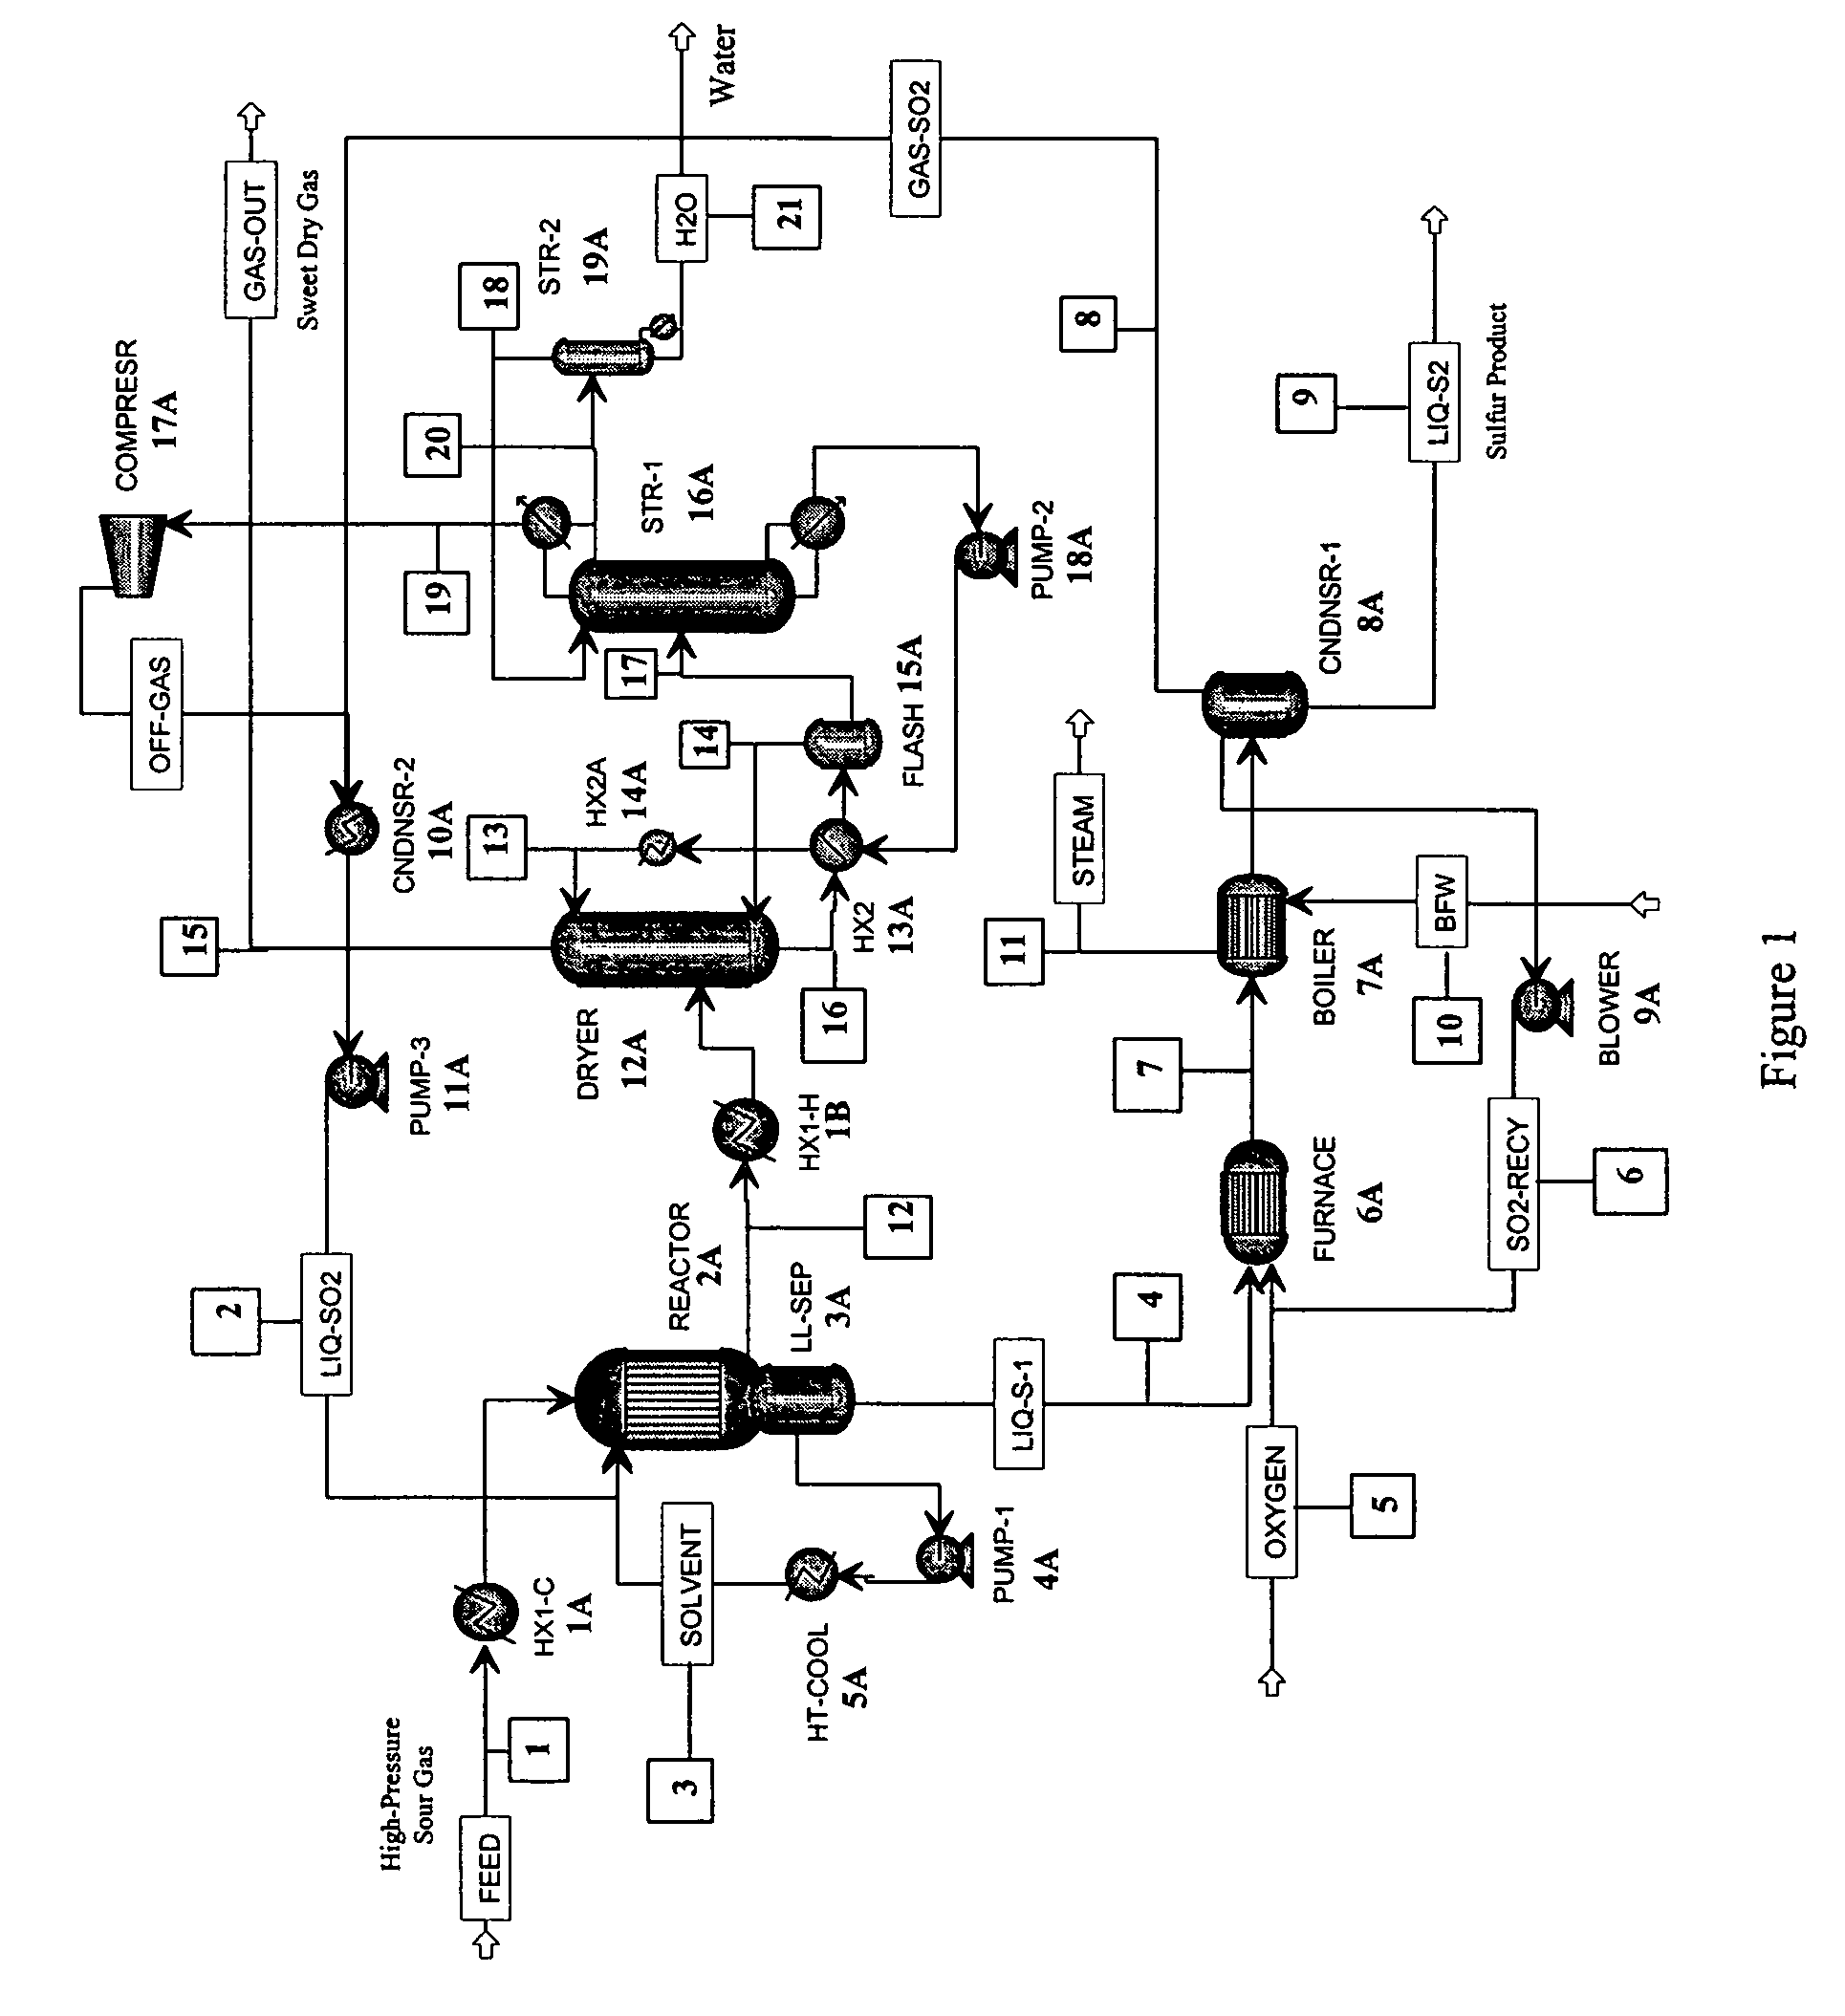 Process for sulfur removal suitable for treating high-pressure gas streams